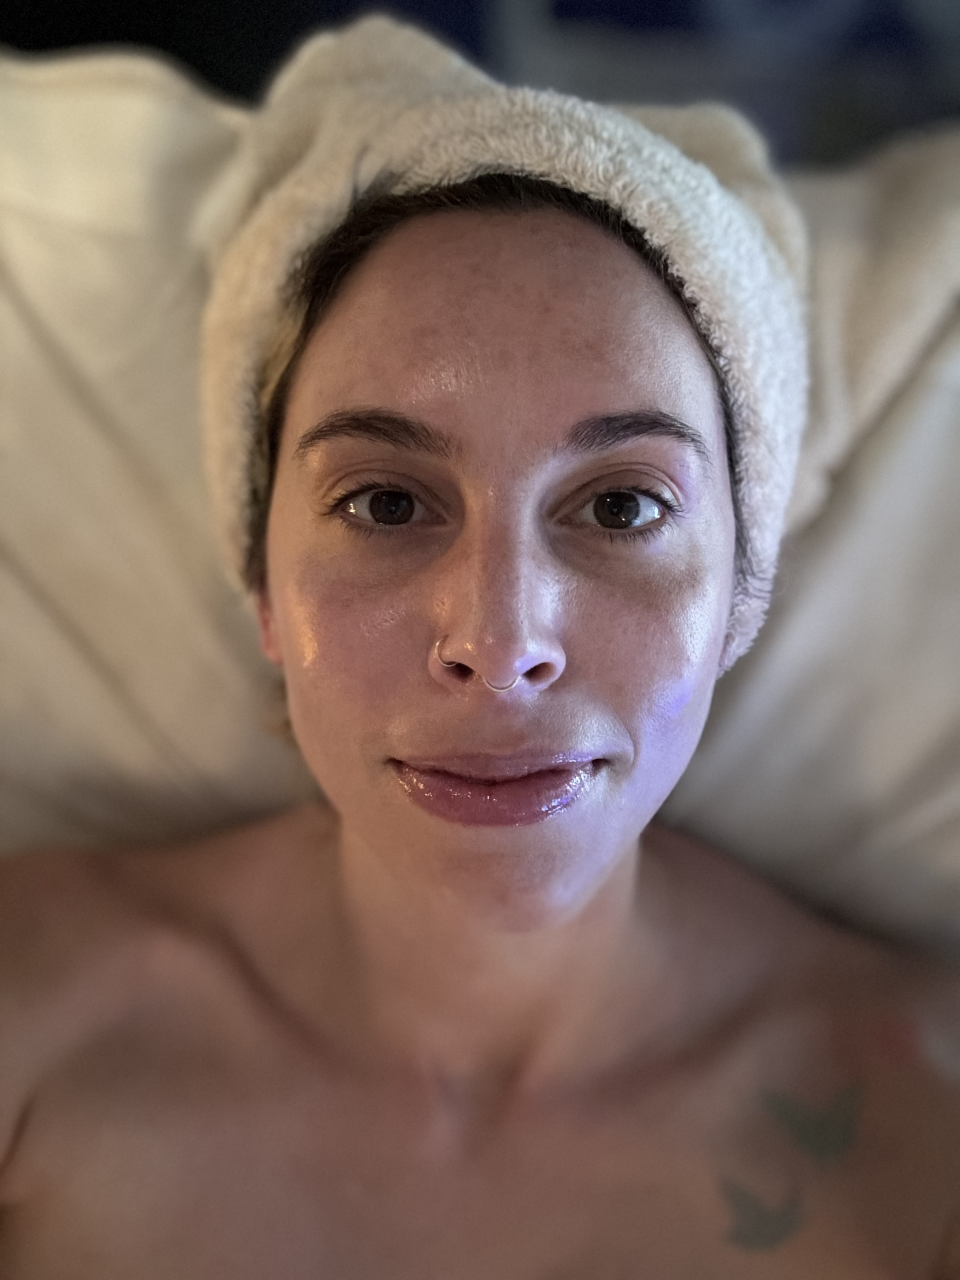 Woman with headband lying down, receiving a spa facial treatment, relaxing